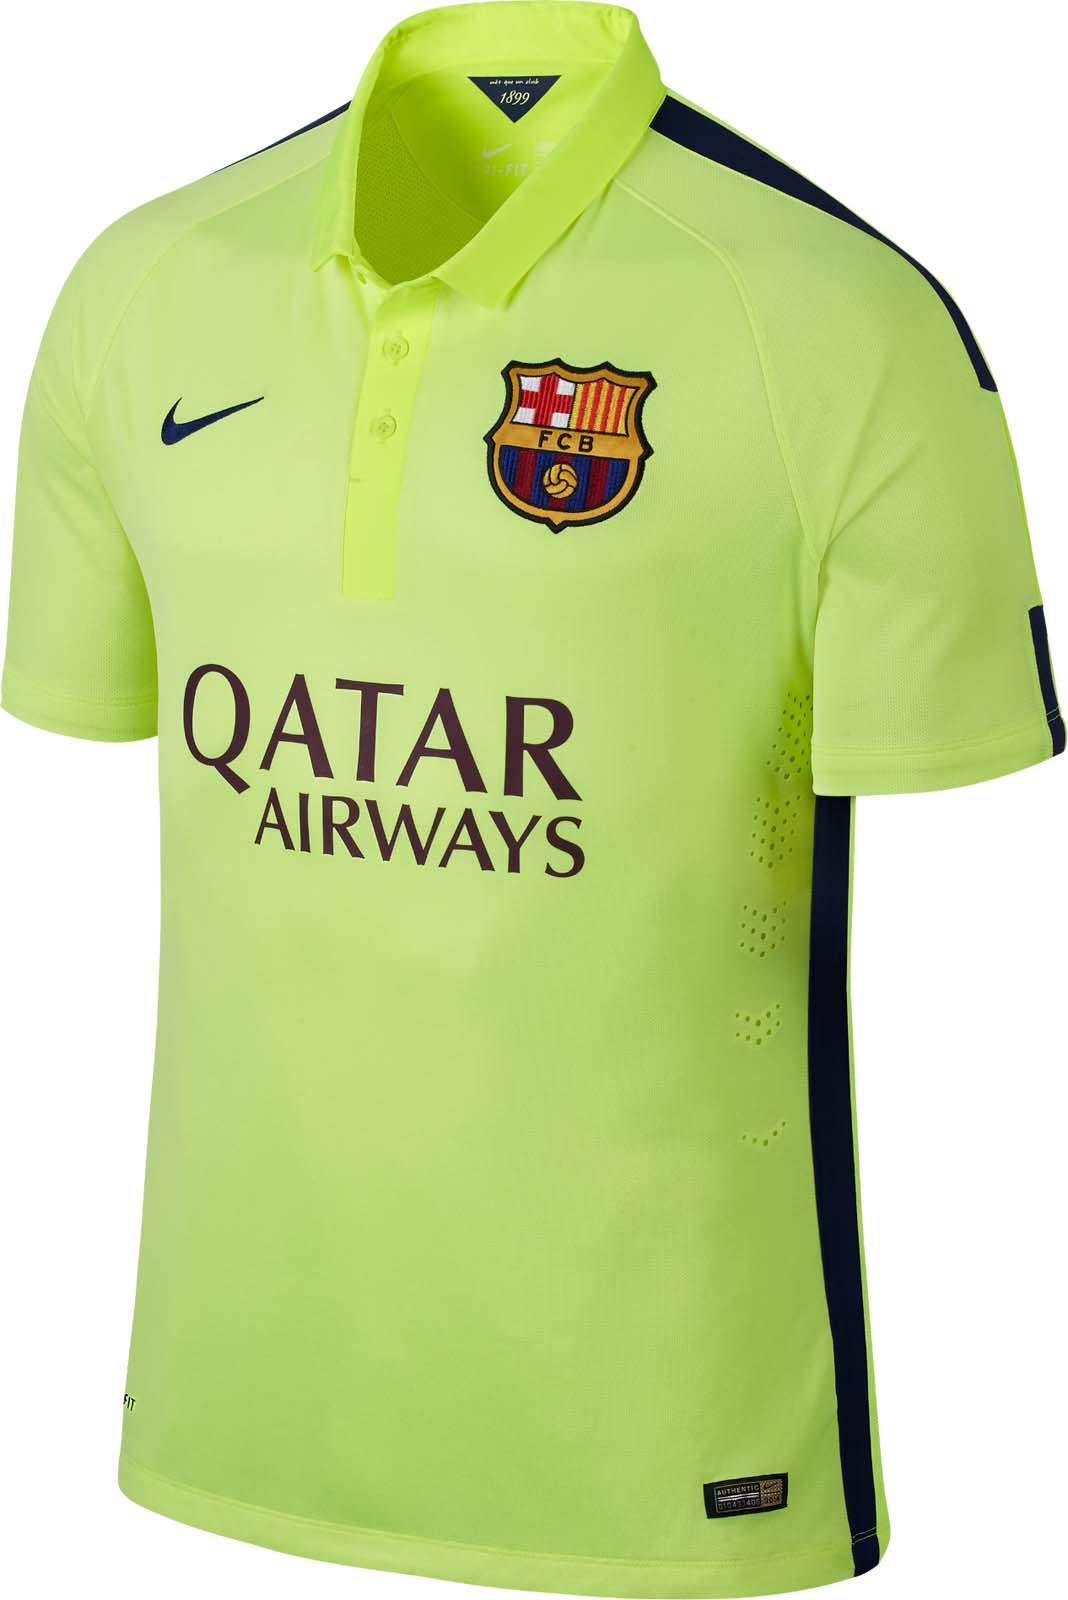   fc barcelona 2014 15 third kit this is the new barcelona 14 15 third  fc barcelona home kit 2014/15